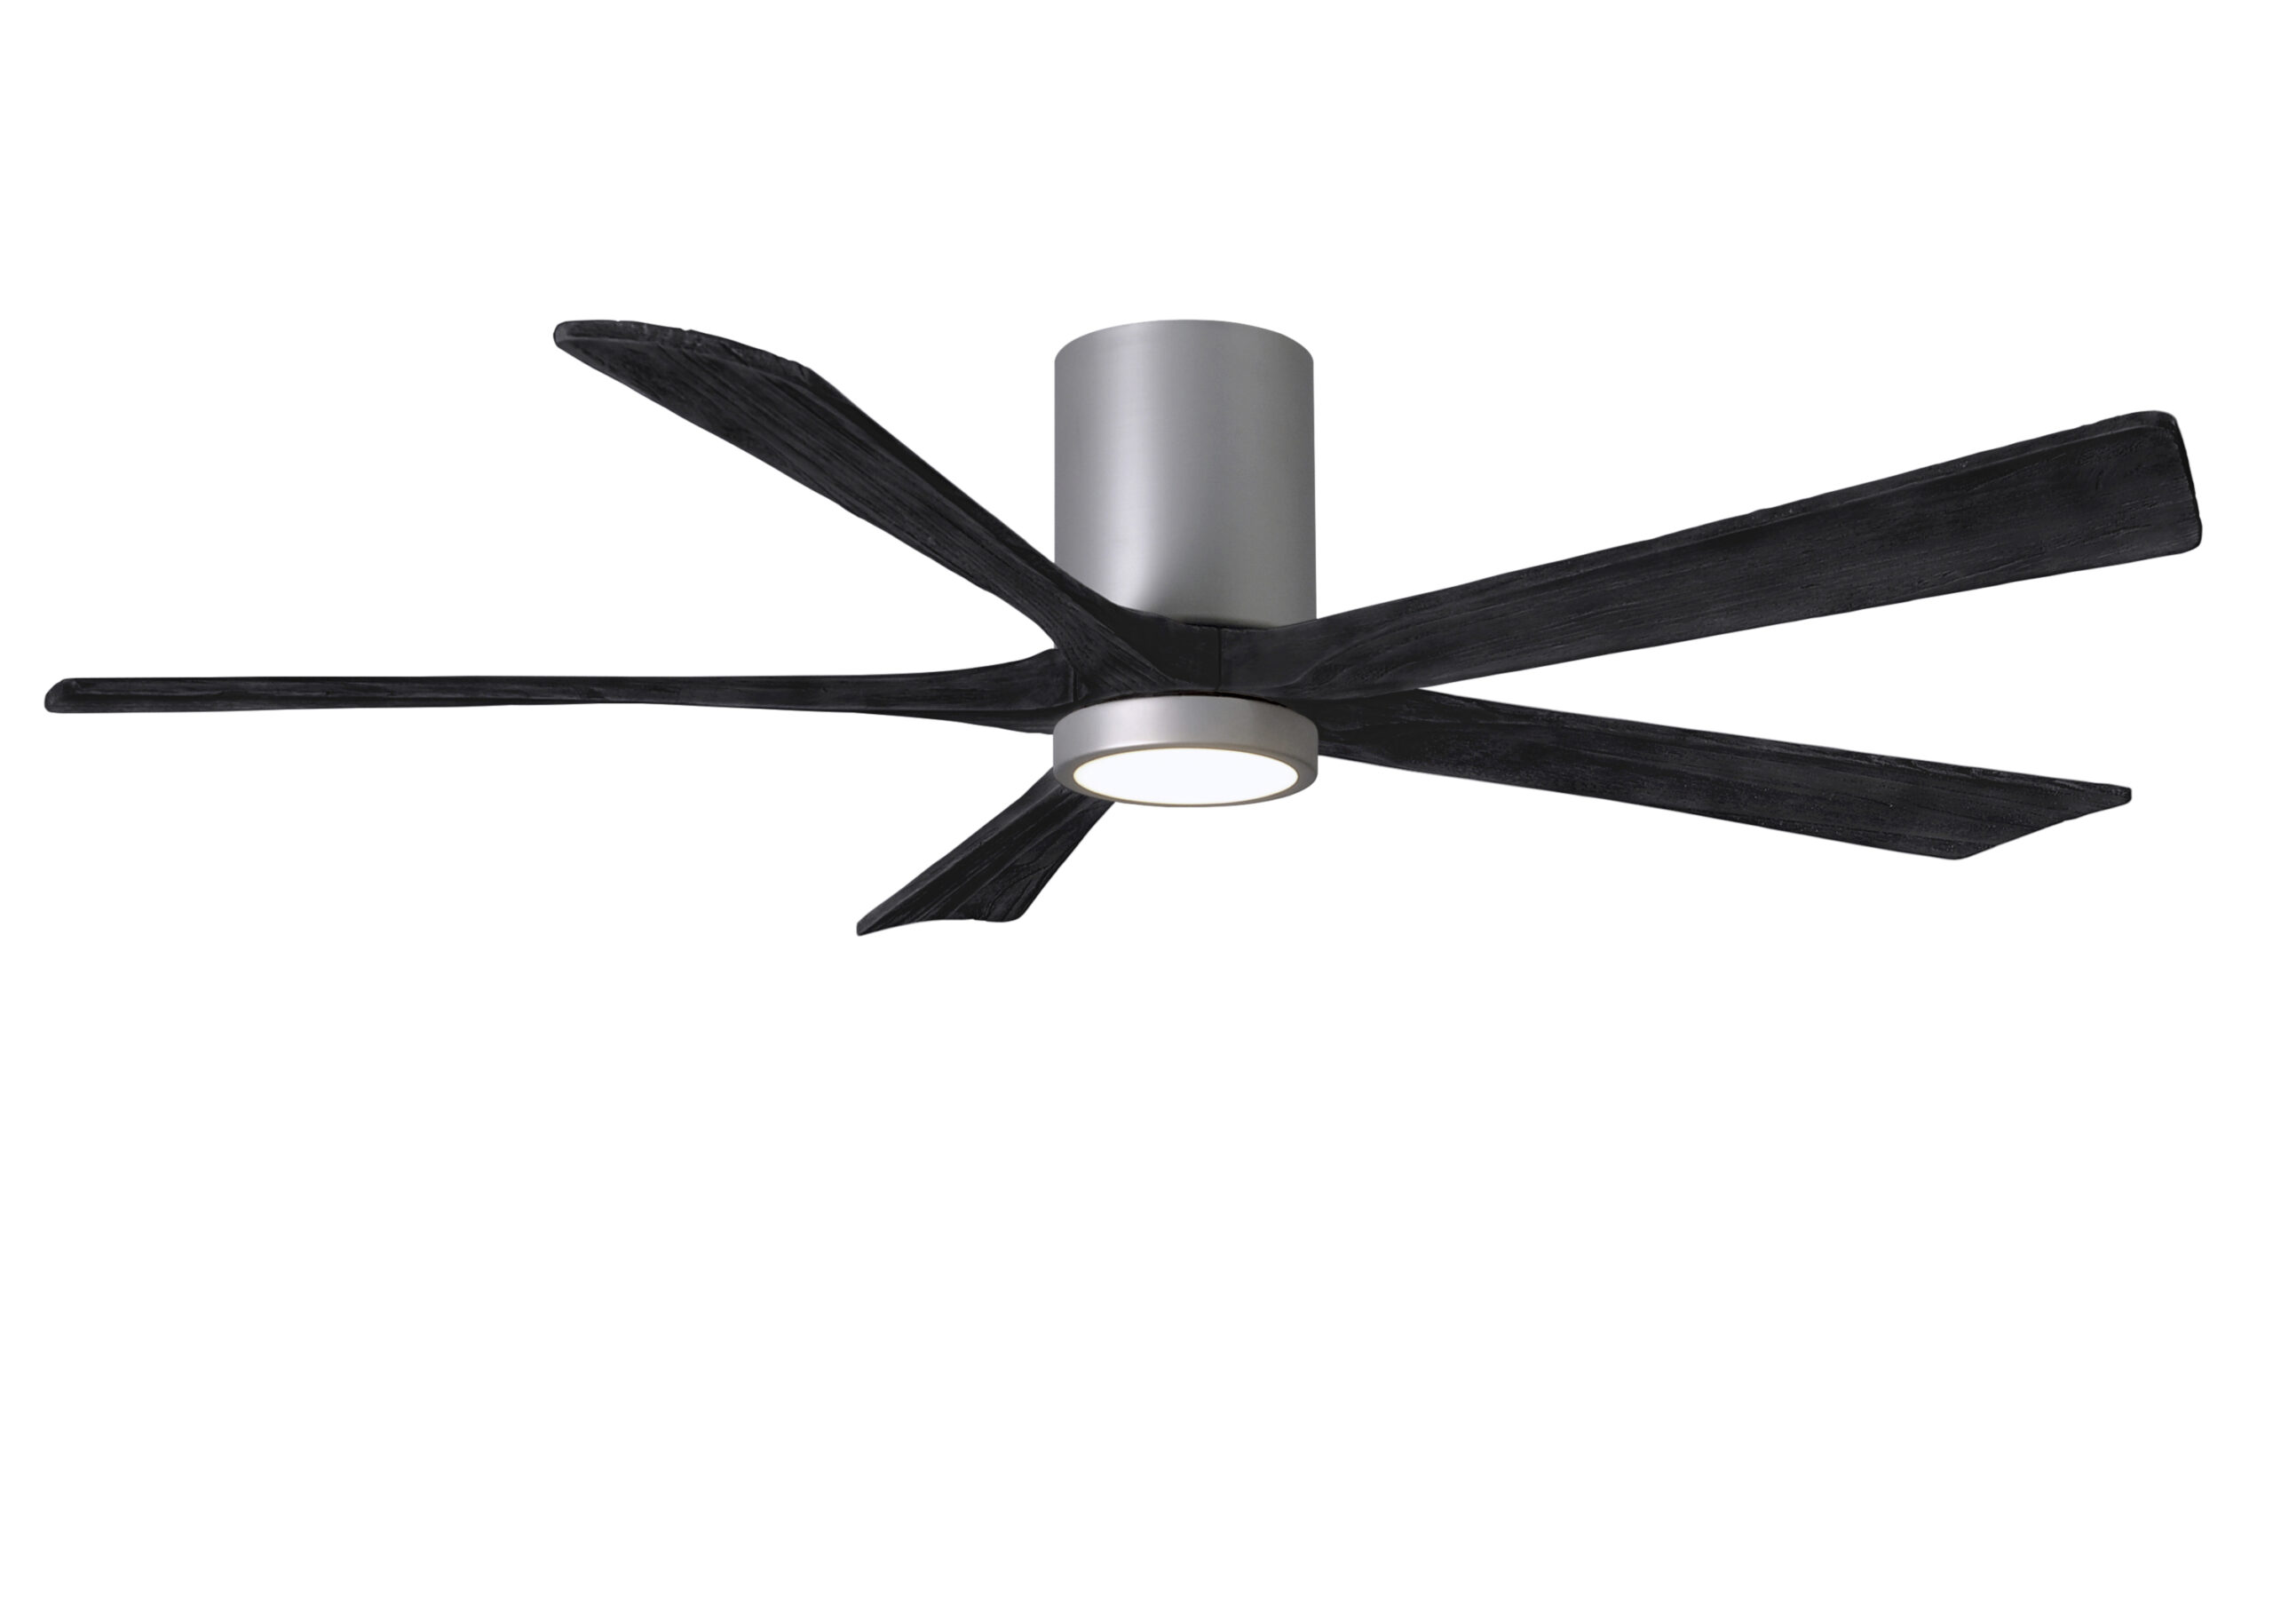 Irene-5HLK Ceiling Fan in Brushed Nickel Finish with 60